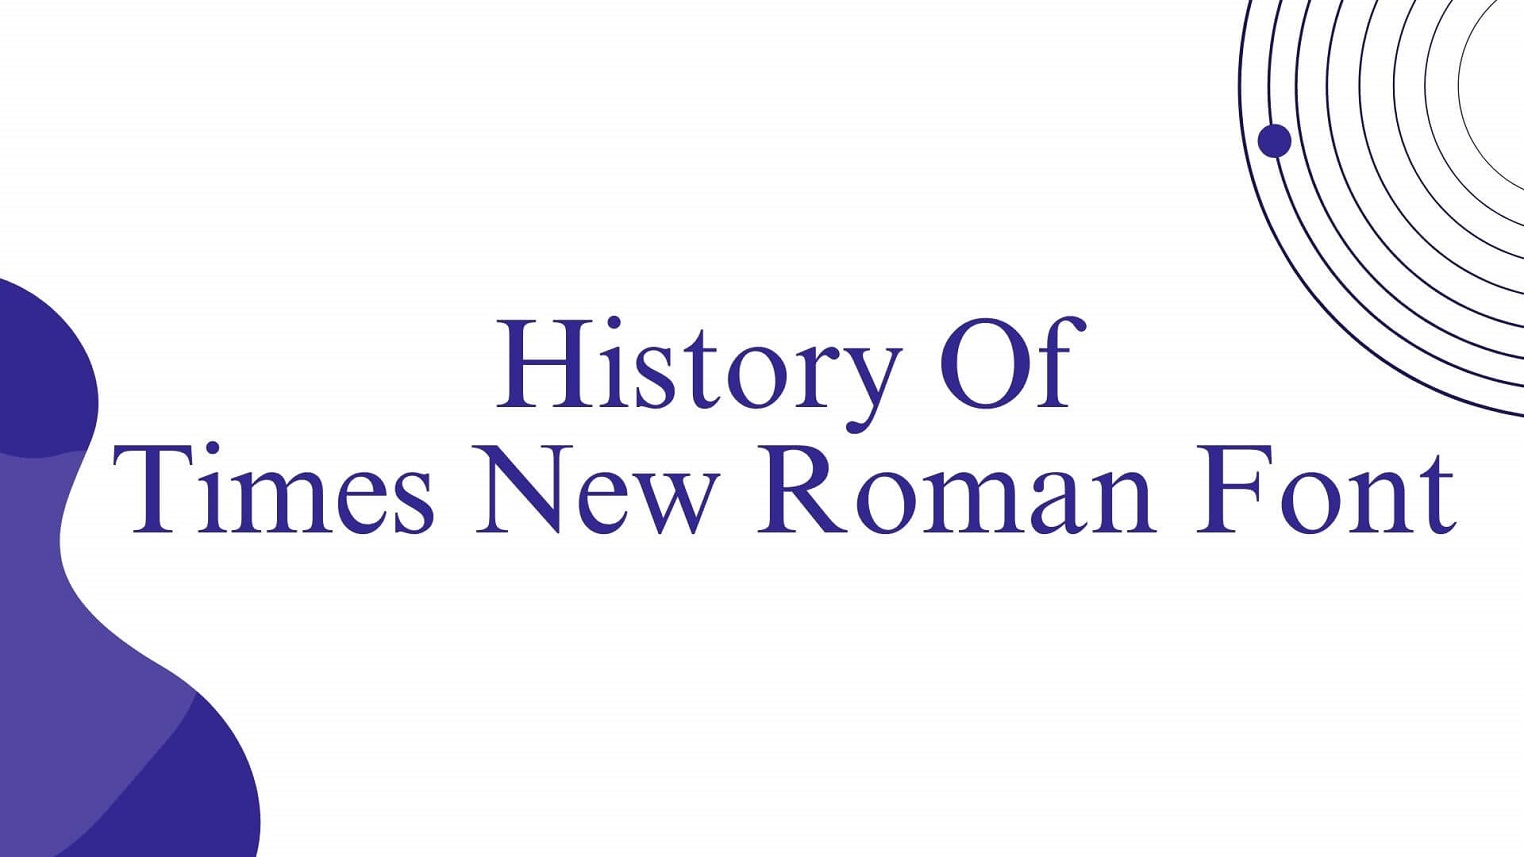 History of Times New Roman Font